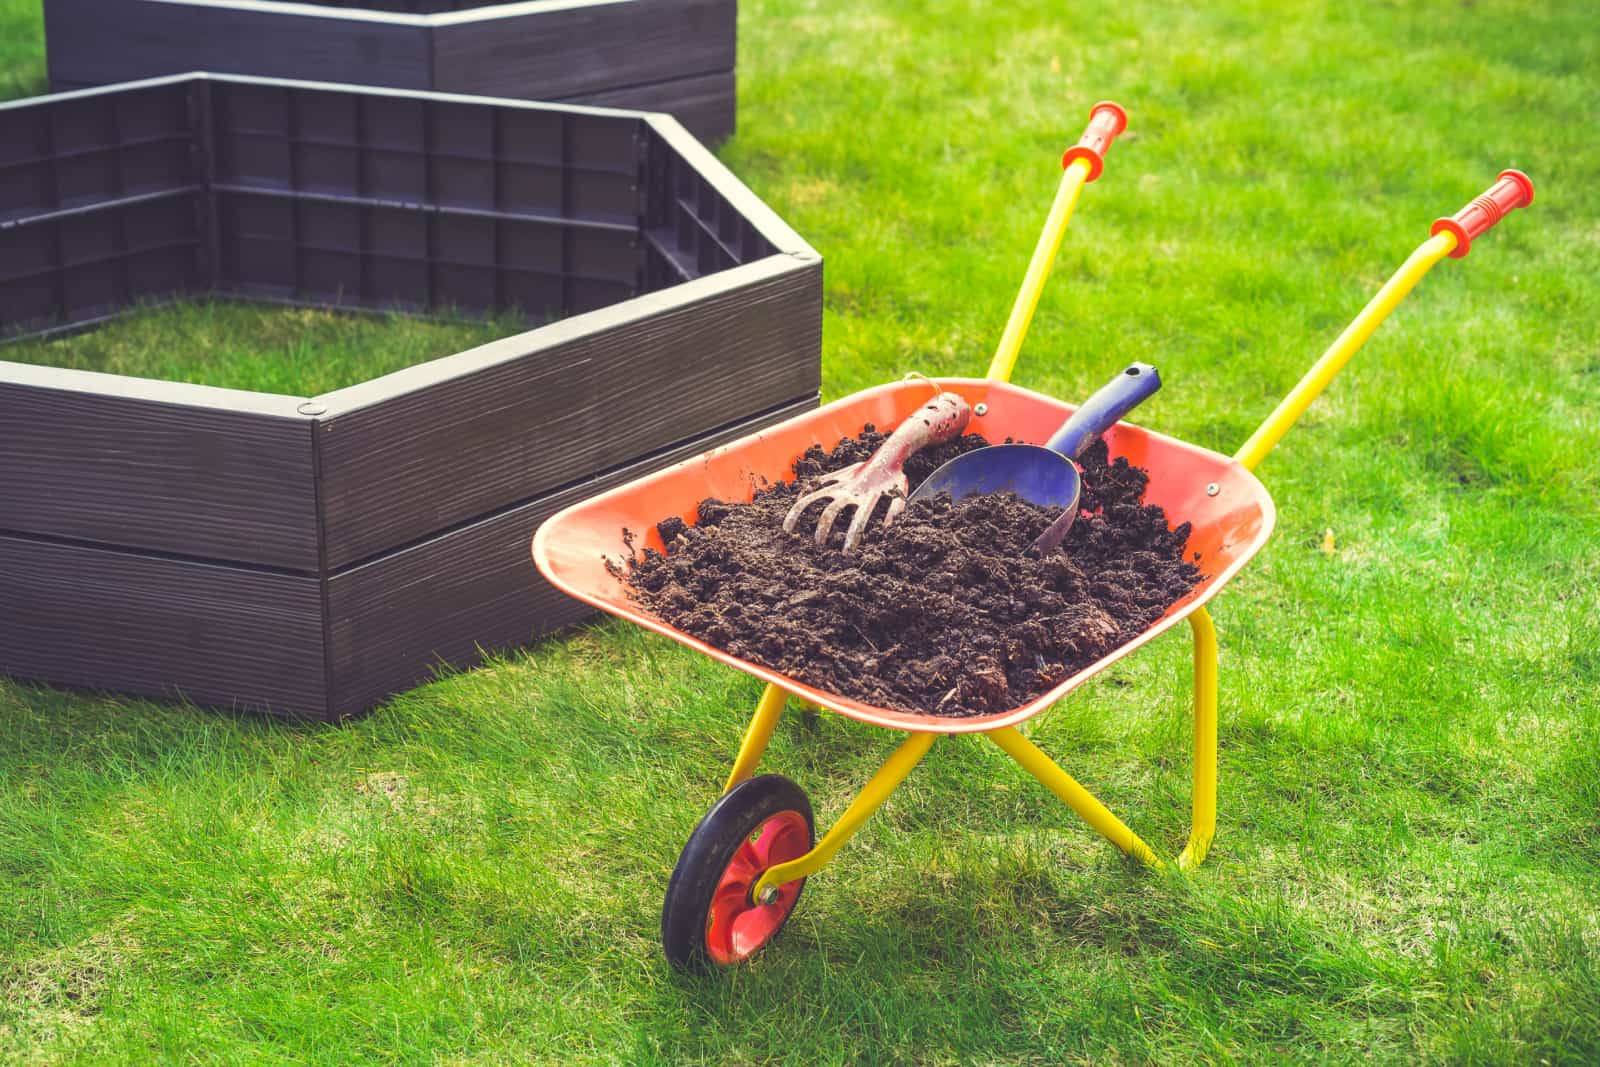 Garden barrow with soil and empty raised beds on grass prepared for filling with soil. Urban gardening concept.